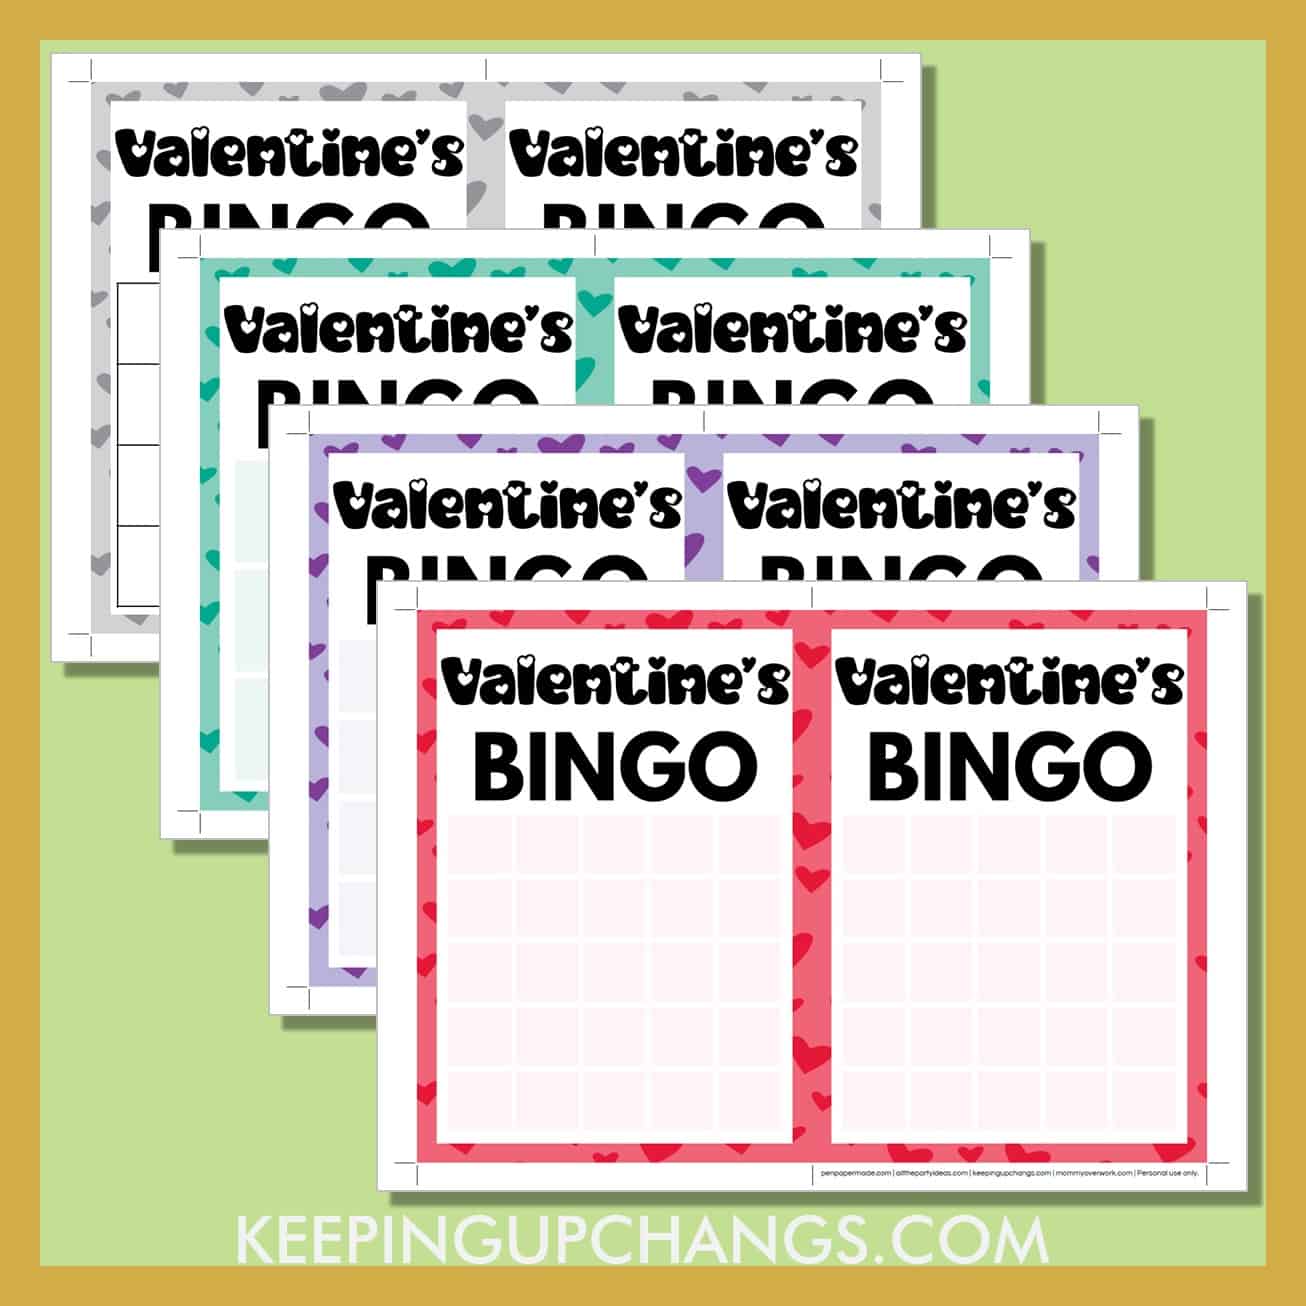 free blank valentine's bingo card printable templates in 3x3, 4x4 and 5x5 grids.